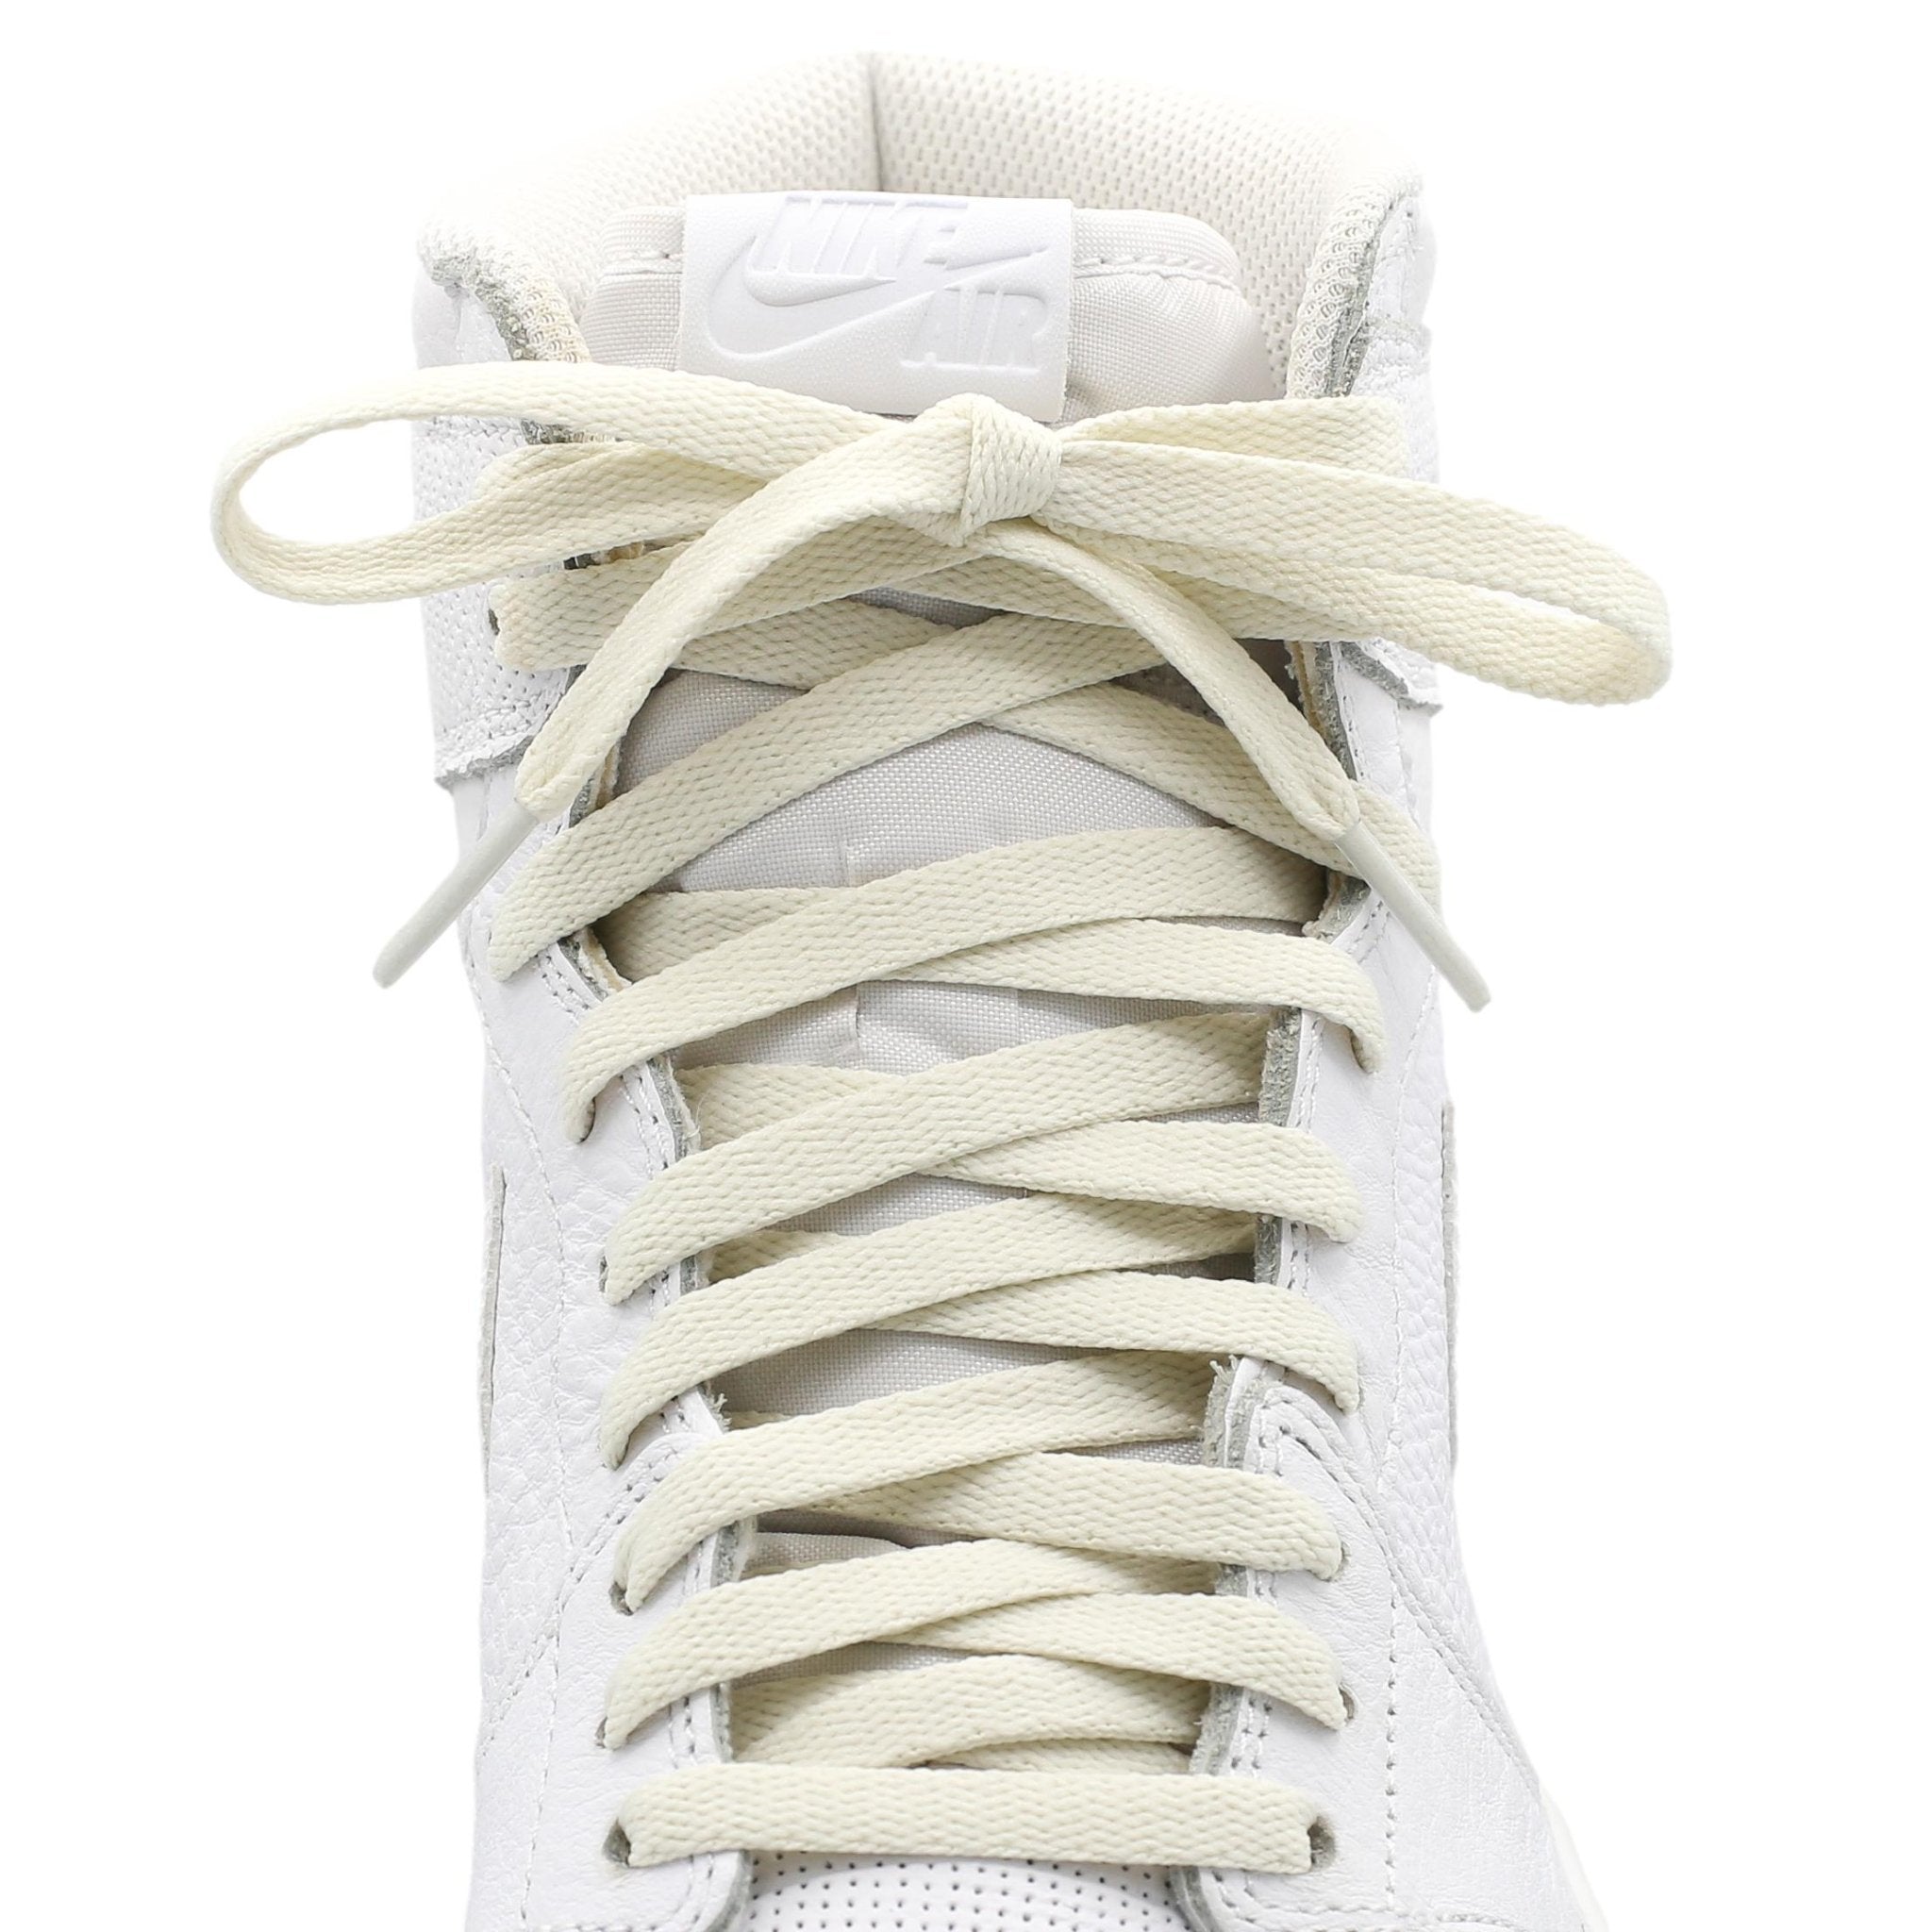 Jordan and Dunk Replacement Shoe Laces